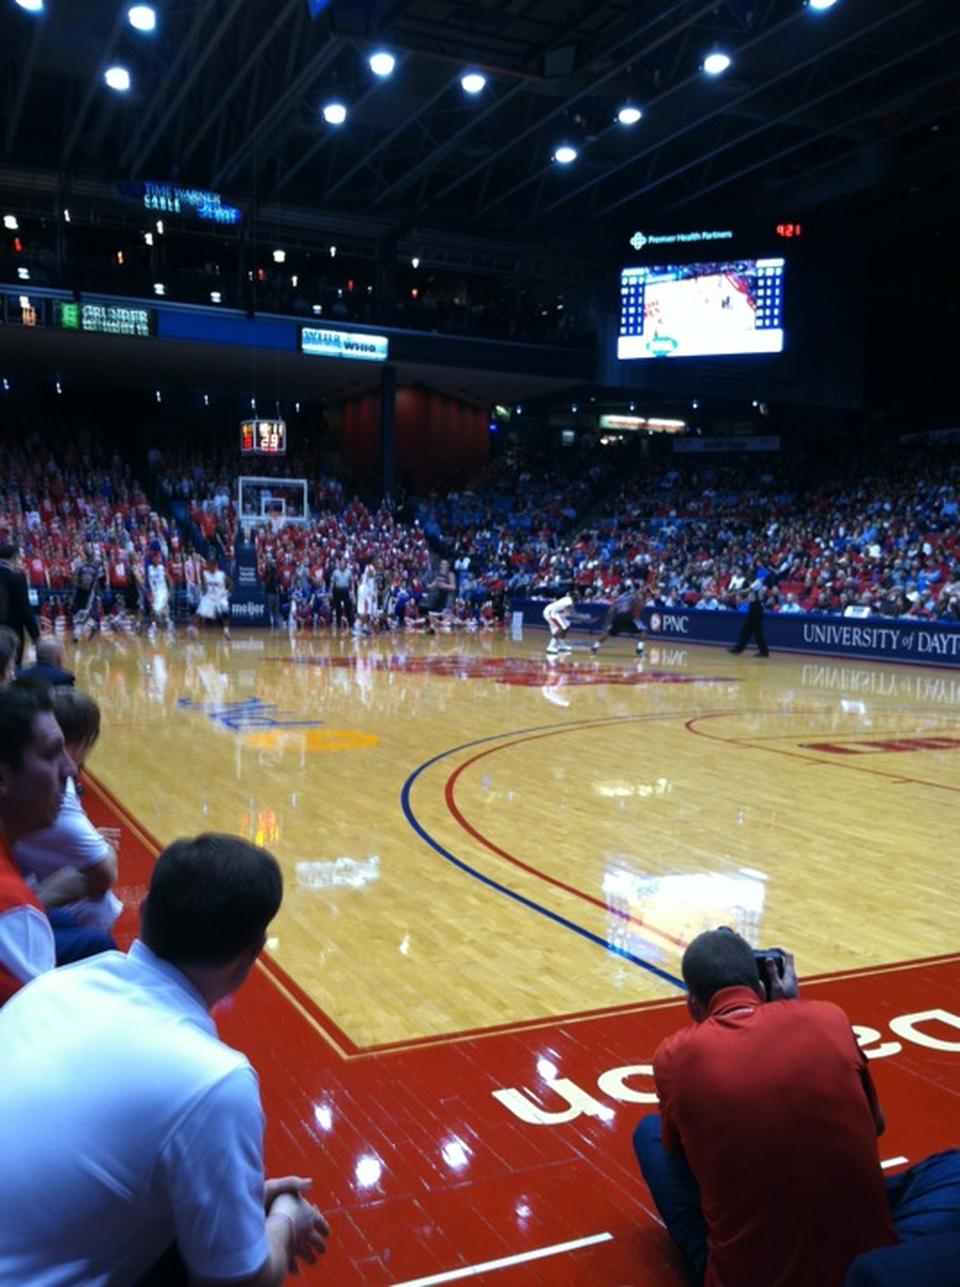 section 103, row a seat view  - university of dayton arena